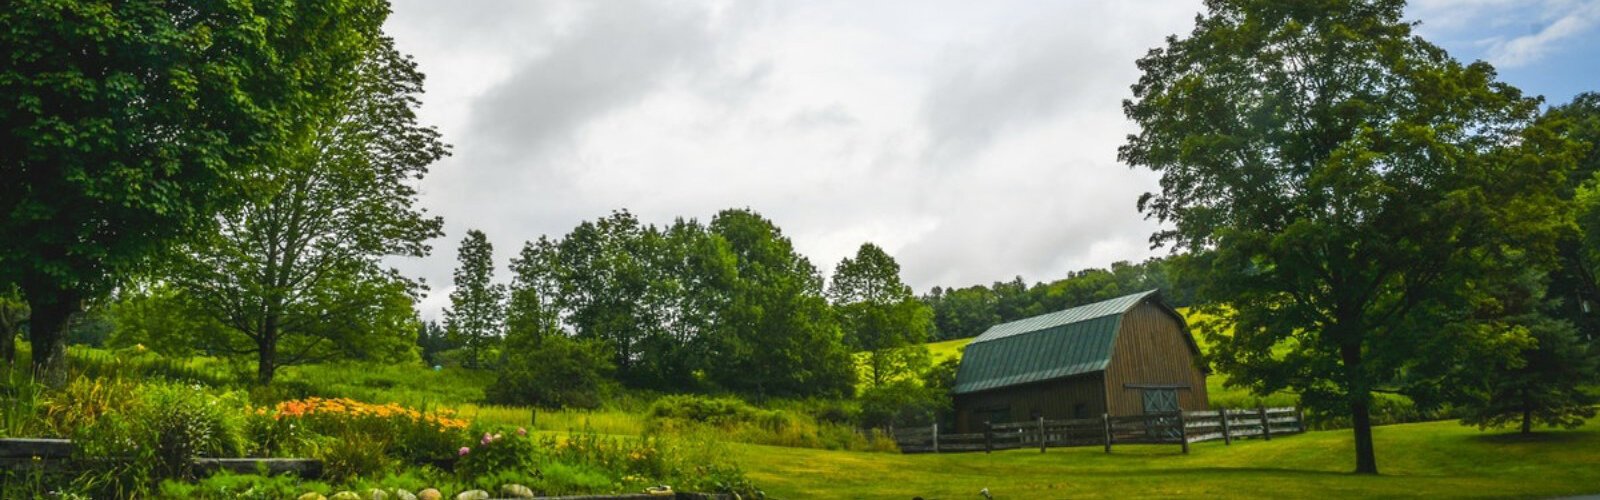 Castle Campus is a 300-acre environmental complex located in Ellicottville, N.Y.